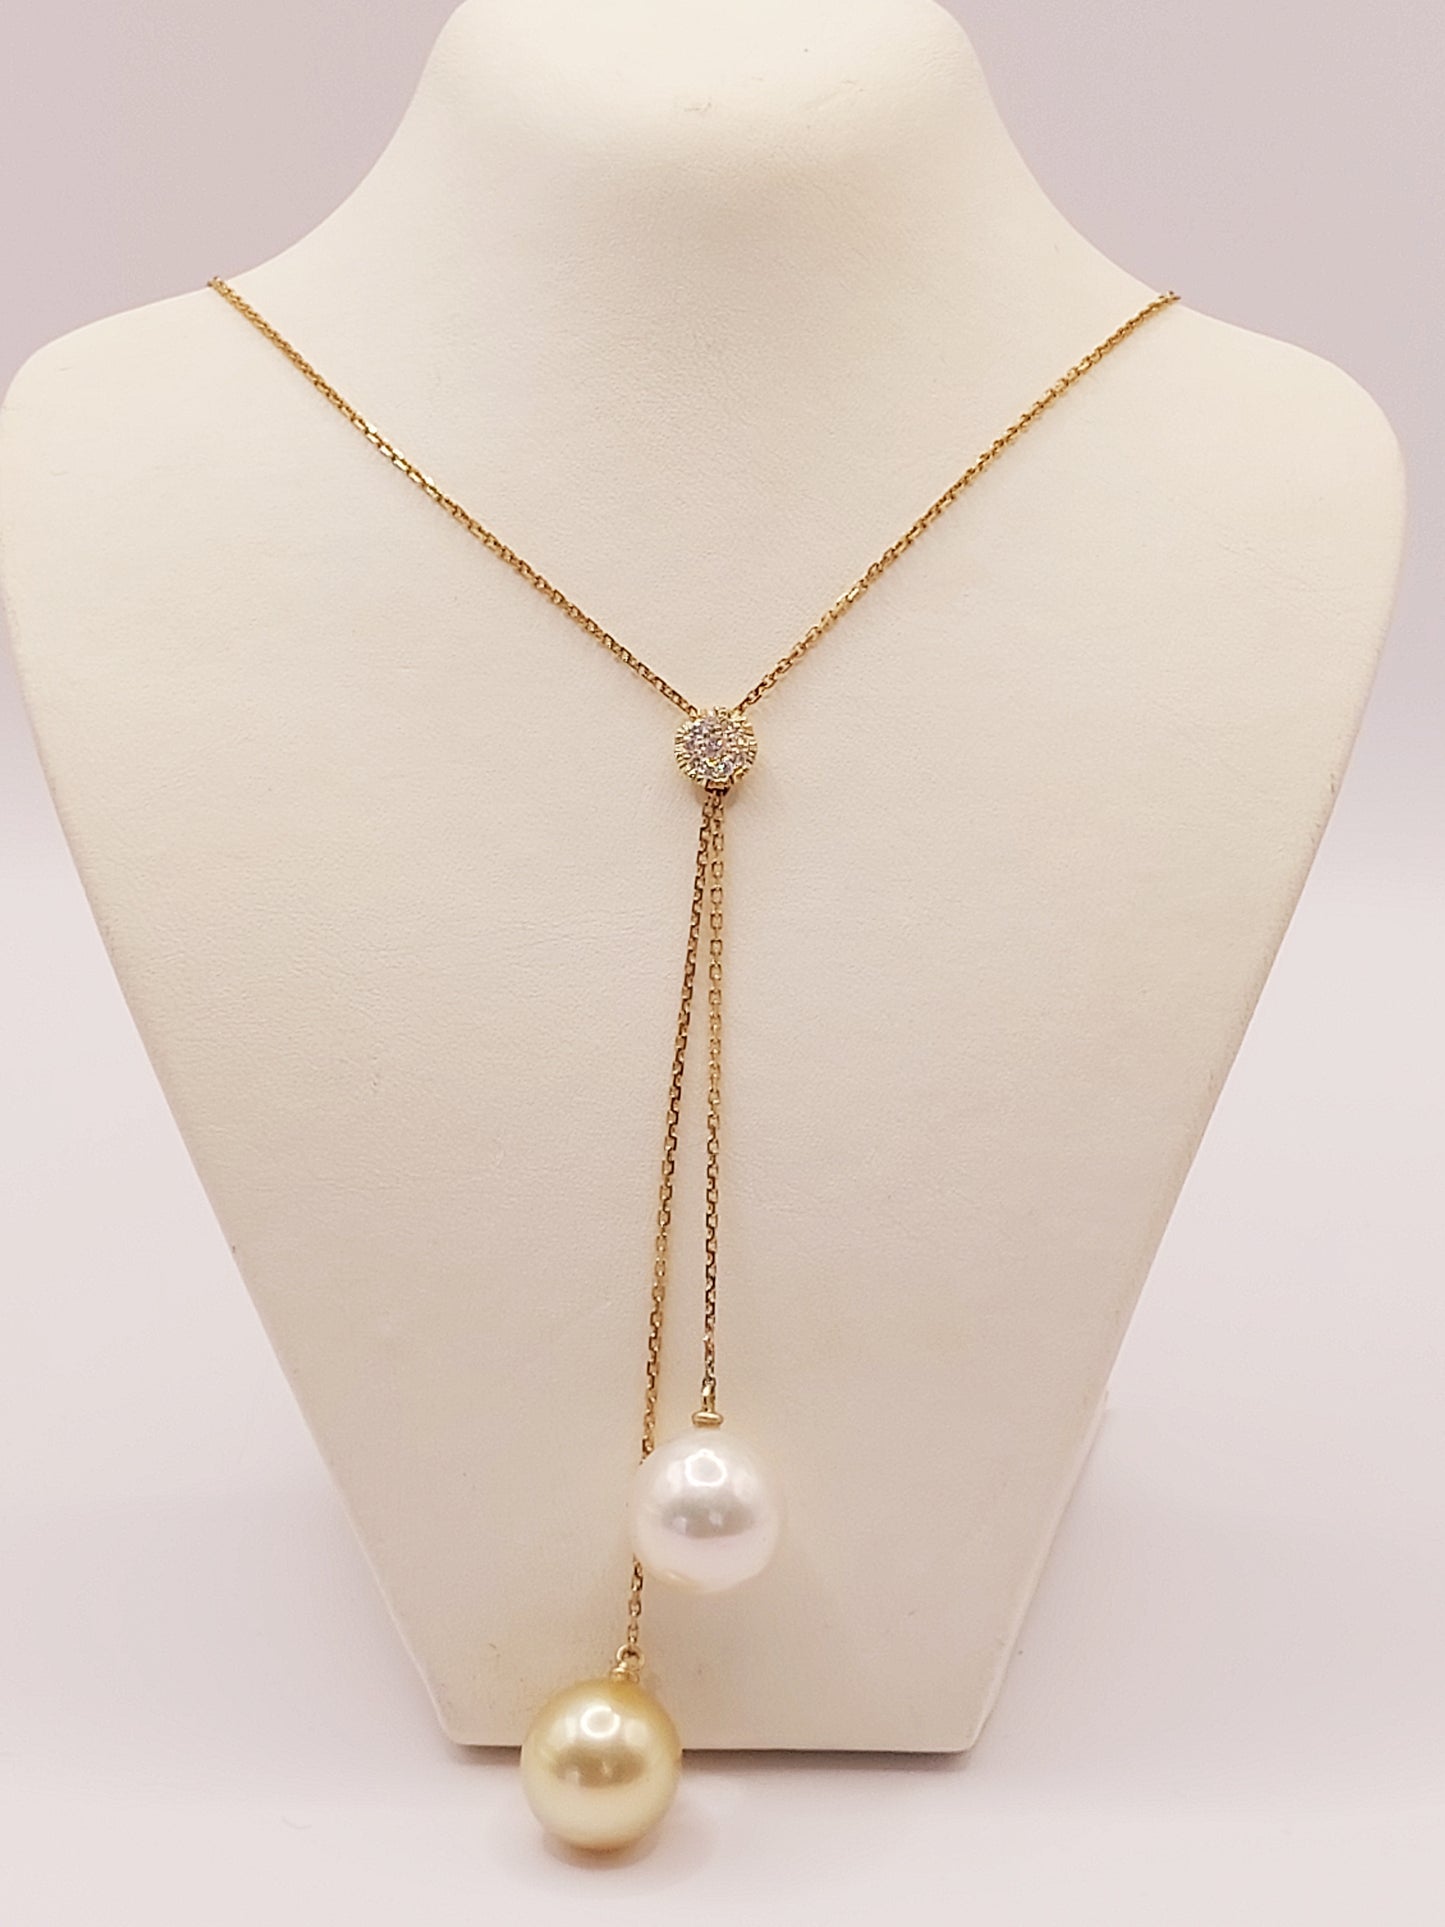 Golden & White South Sea Pearl with Diamonds Necklace